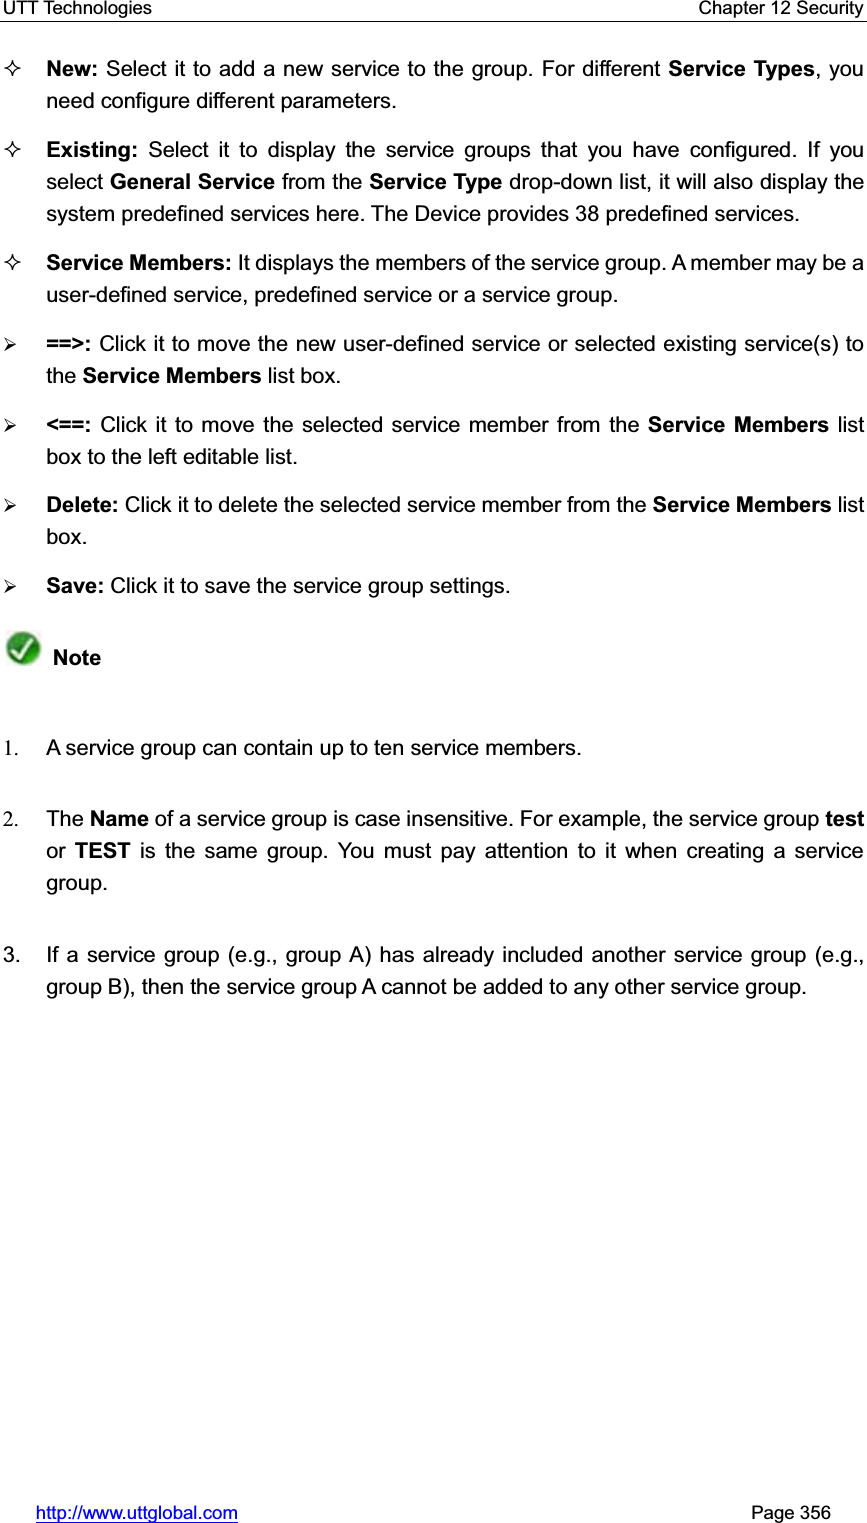 UTT Technologies    Chapter 12 Security   http://www.uttglobal.com                                                       Page 356 New: Select it to add a new service to the group. For different Service Types, you need configure different parameters.   Existing: Select it to display the service groups that you have configured. If youselect General Service from the Service Type drop-down list, it will also display the system predefined services here. The Device provides 38 predefined services.   Service Members: It displays the members of the service group. A member may be a user-defined service, predefined service or a service group. ¾==&gt;: Click it to move the new user-defined service or selected existing service(s) to the Service Members list box. ¾&lt;==:  Click it to move the selected service member from the Service Members list box to the left editable list.¾Delete: Click it to delete the selected service member from the Service Members list box. ¾Save: Click it to save the service group settings.Note1.  A service group can contain up to ten service members. 2. The Name of a service group is case insensitive. For example, the service group testor TEST is the same group. You must pay attention to it when creating a service group.3.  If a service group (e.g., group A) has already included another service group (e.g., group B), then the service group A cannot be added to any other service group. 